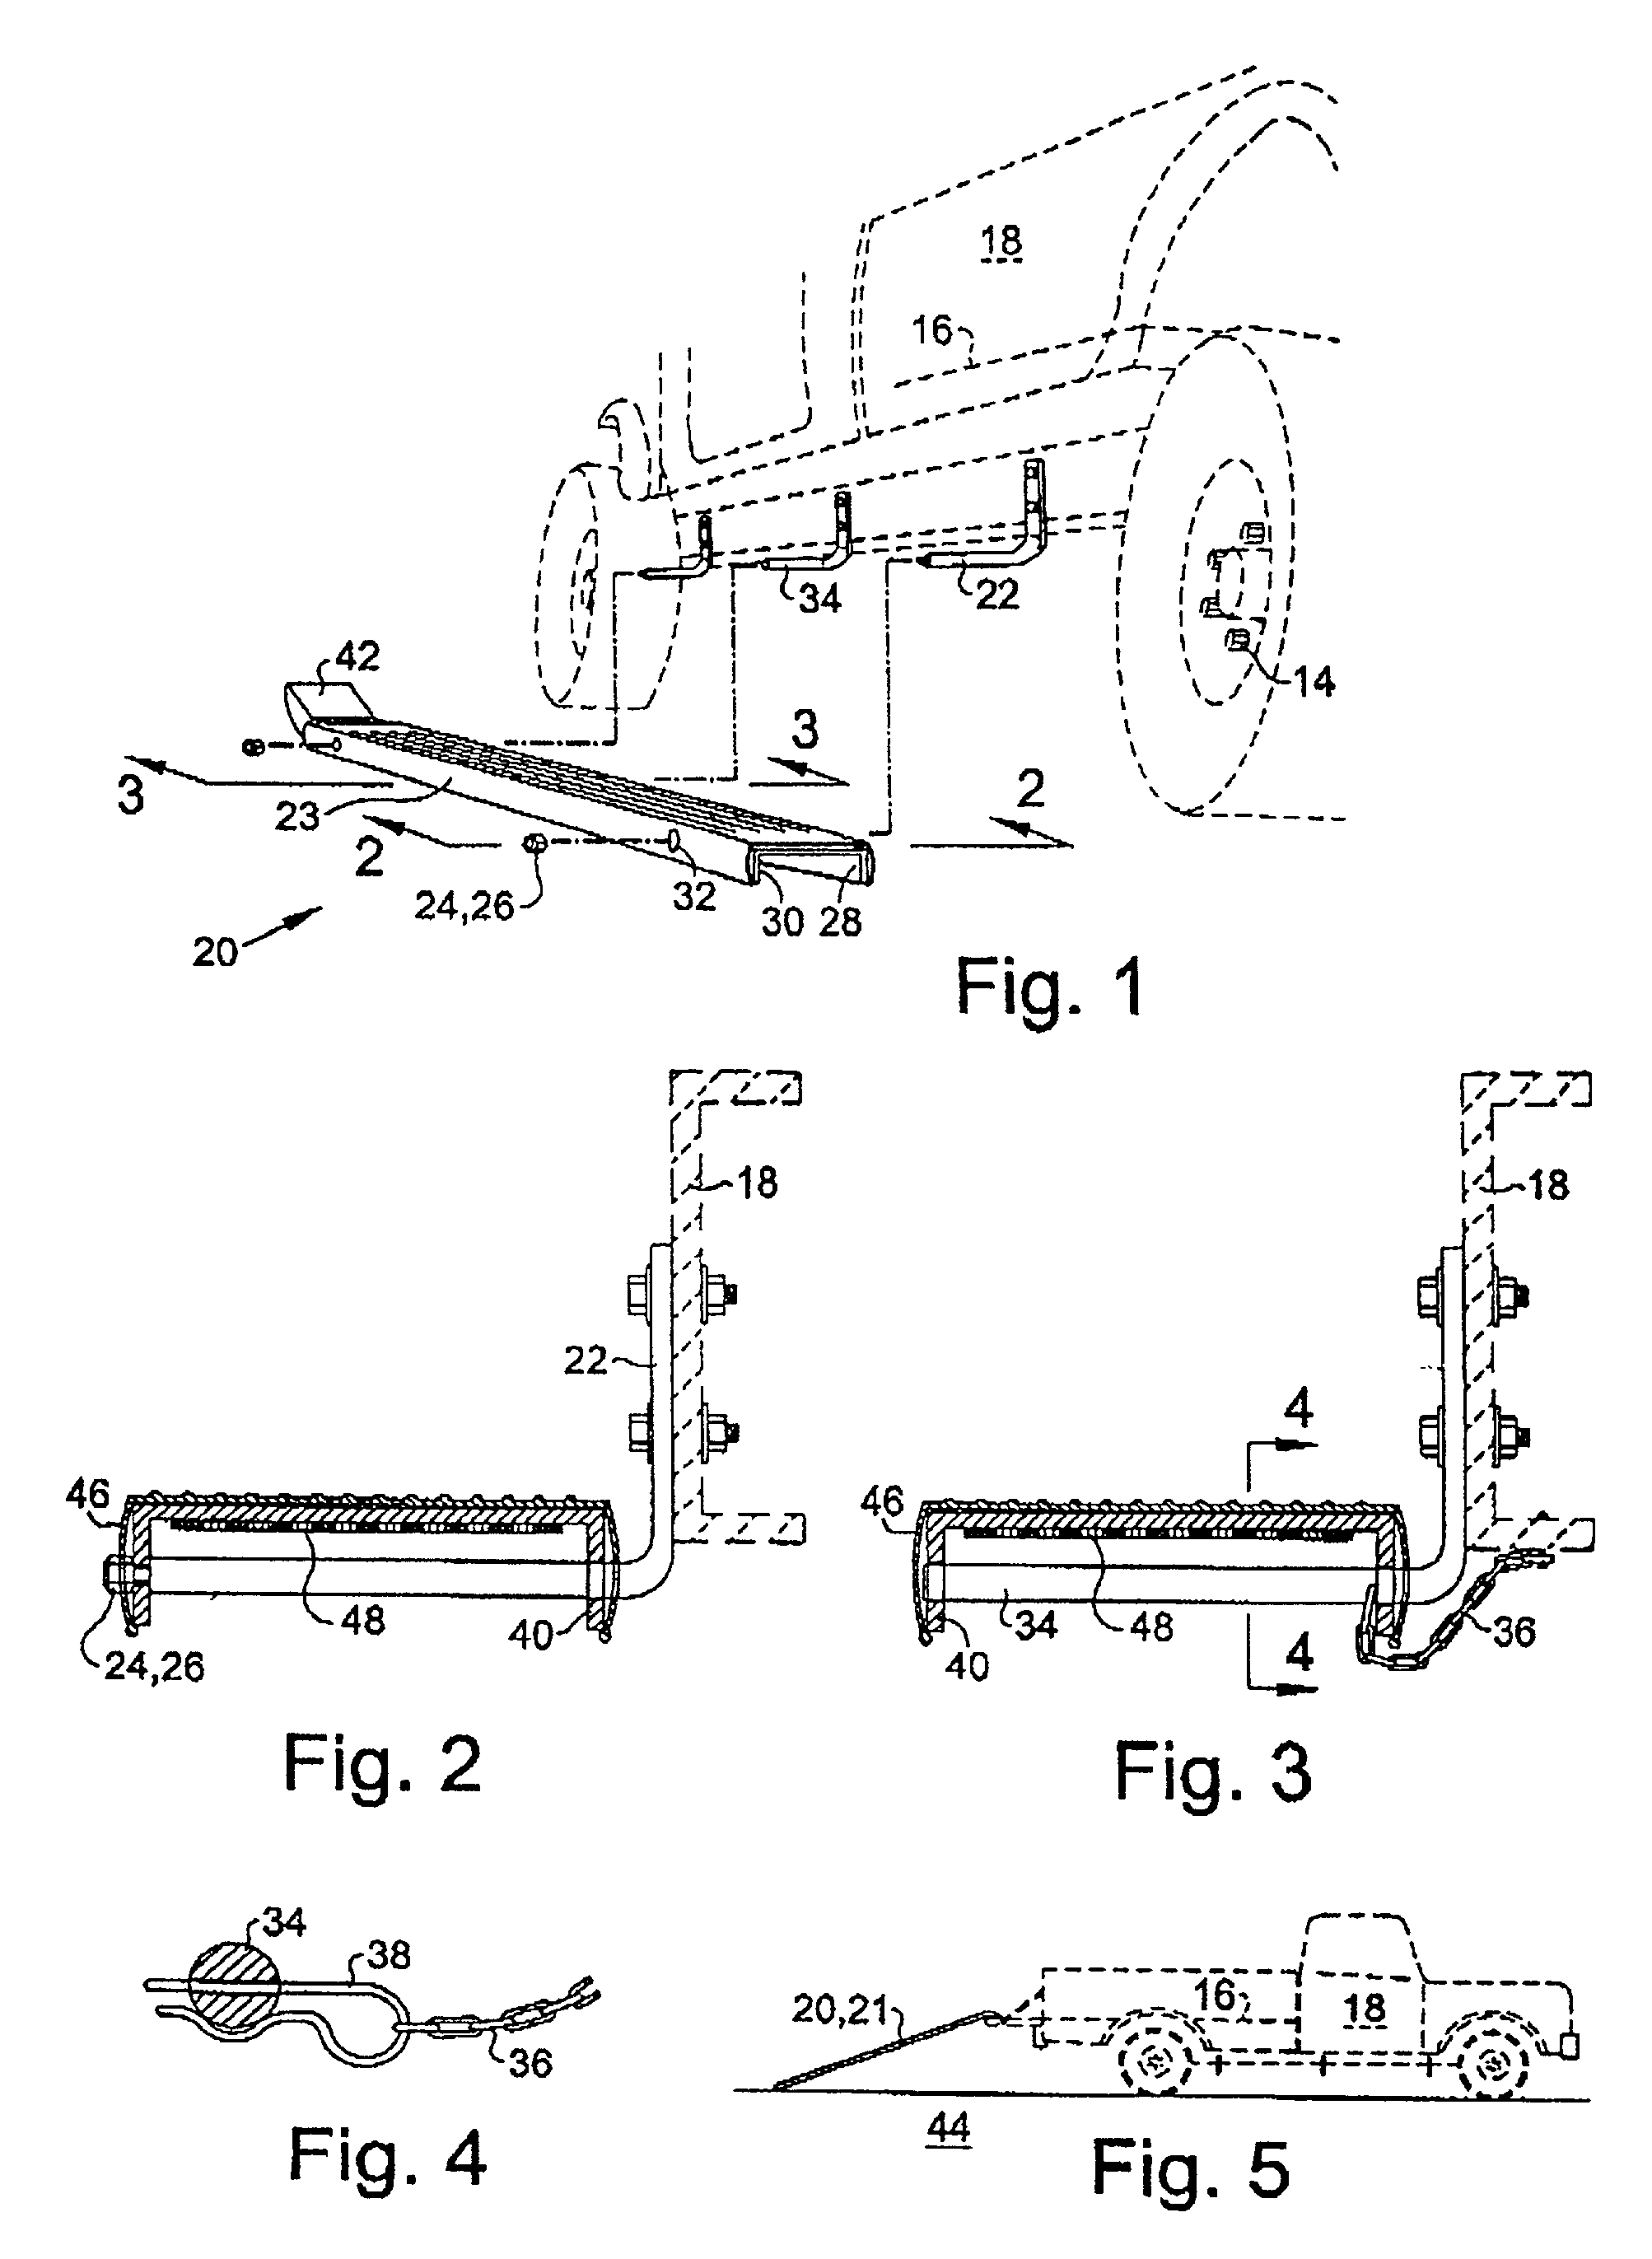 Vehicle running board detachable for use as loading ramp